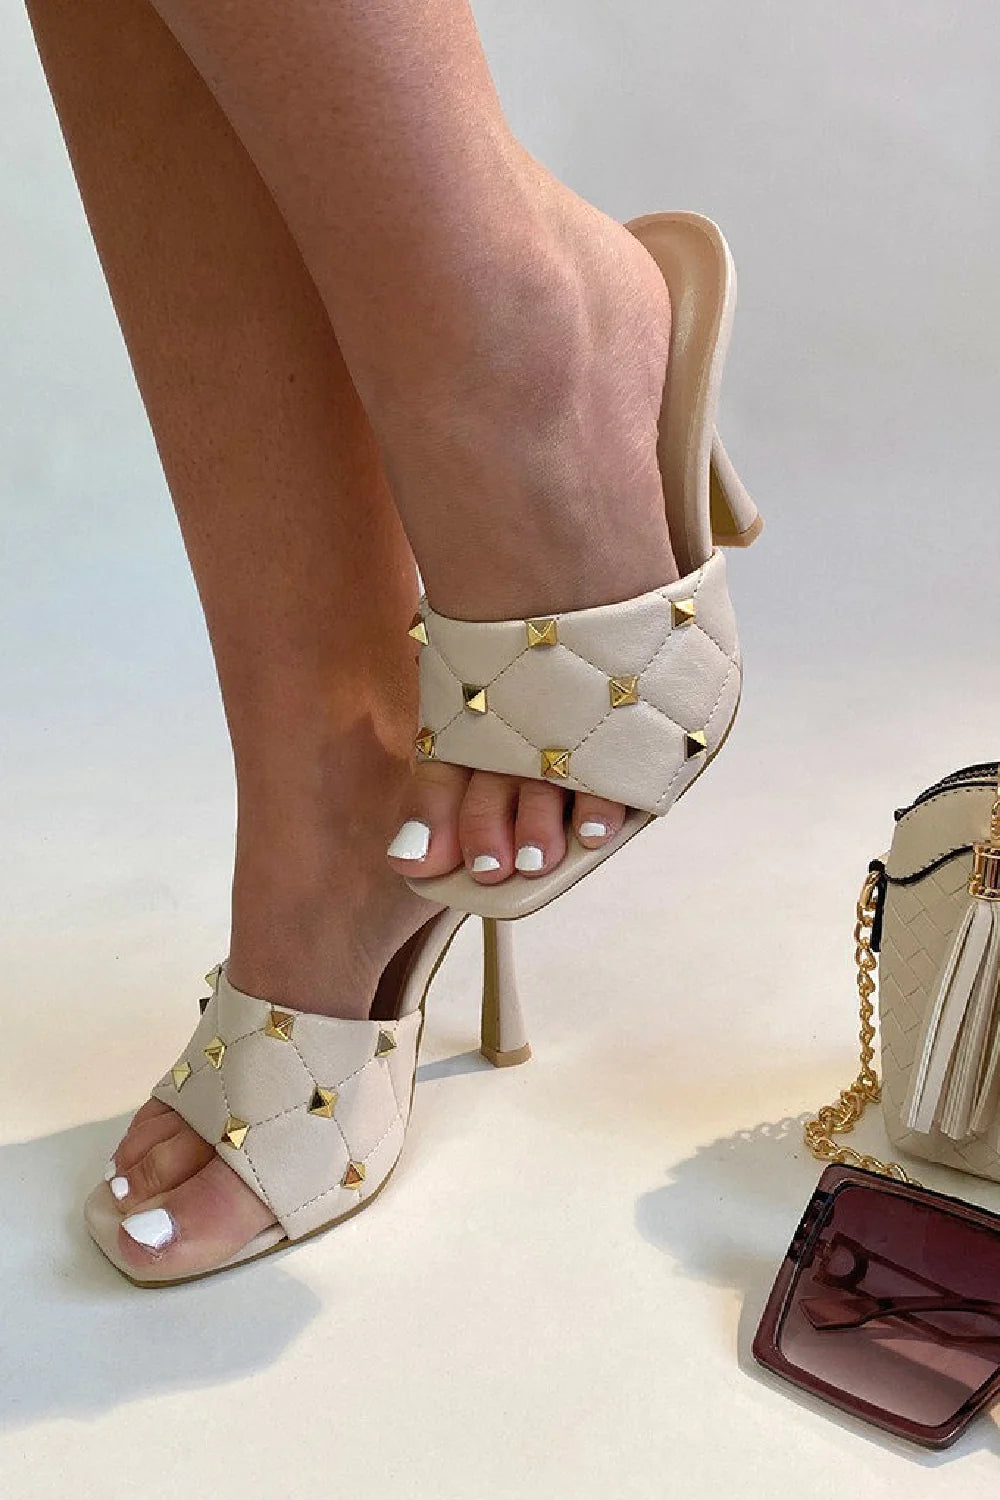 Cream quilted faux leather mule heels with gold studded heels. Model waers cream studded mule heels, she lifts obe leg above the ground. A hand bag and sunglasses are on the ground. 